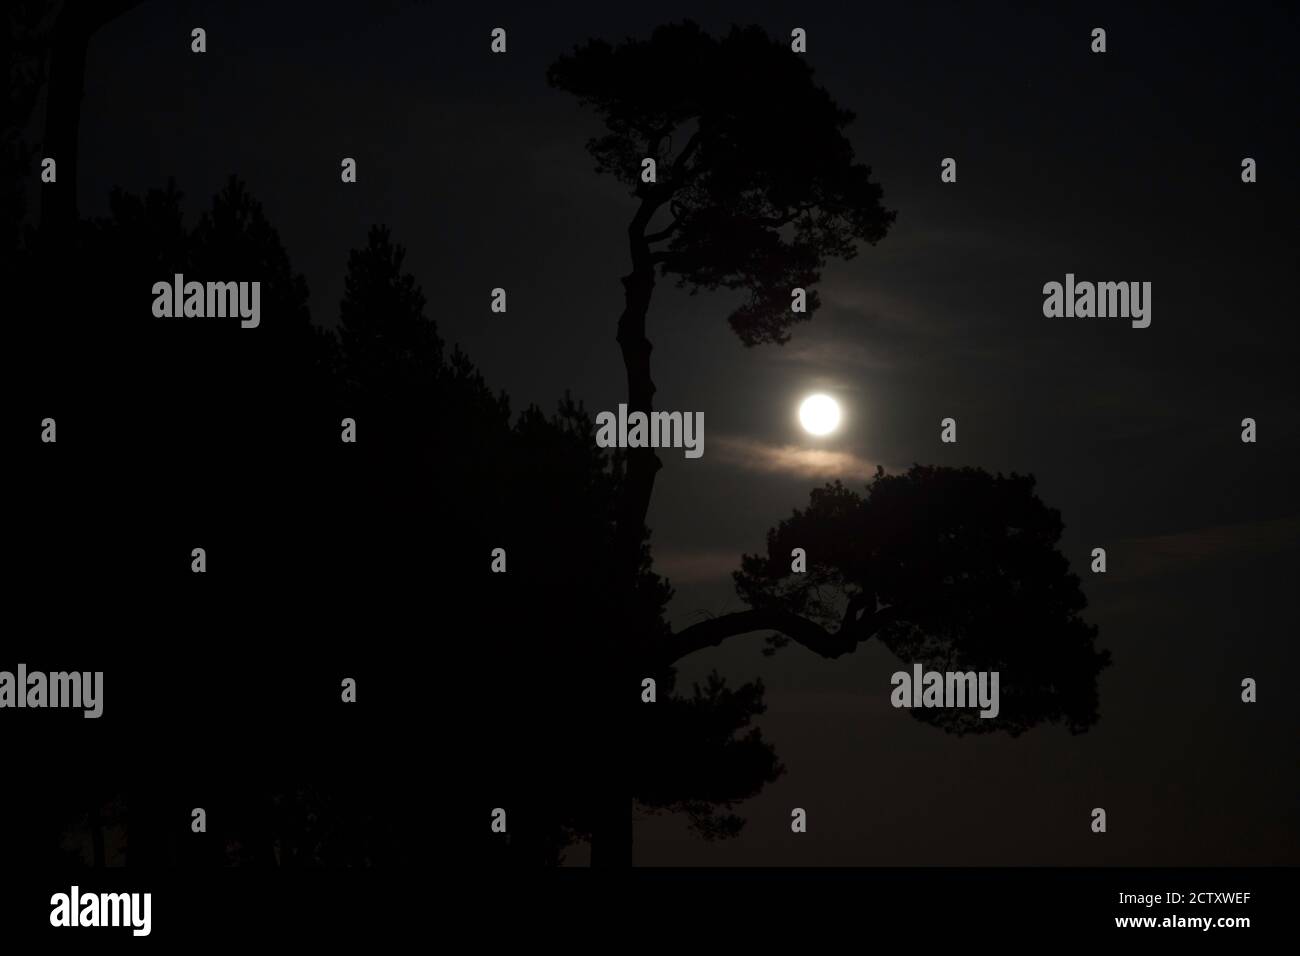 Striking effect of the full moon creating silhouettes of trees Stock Photo